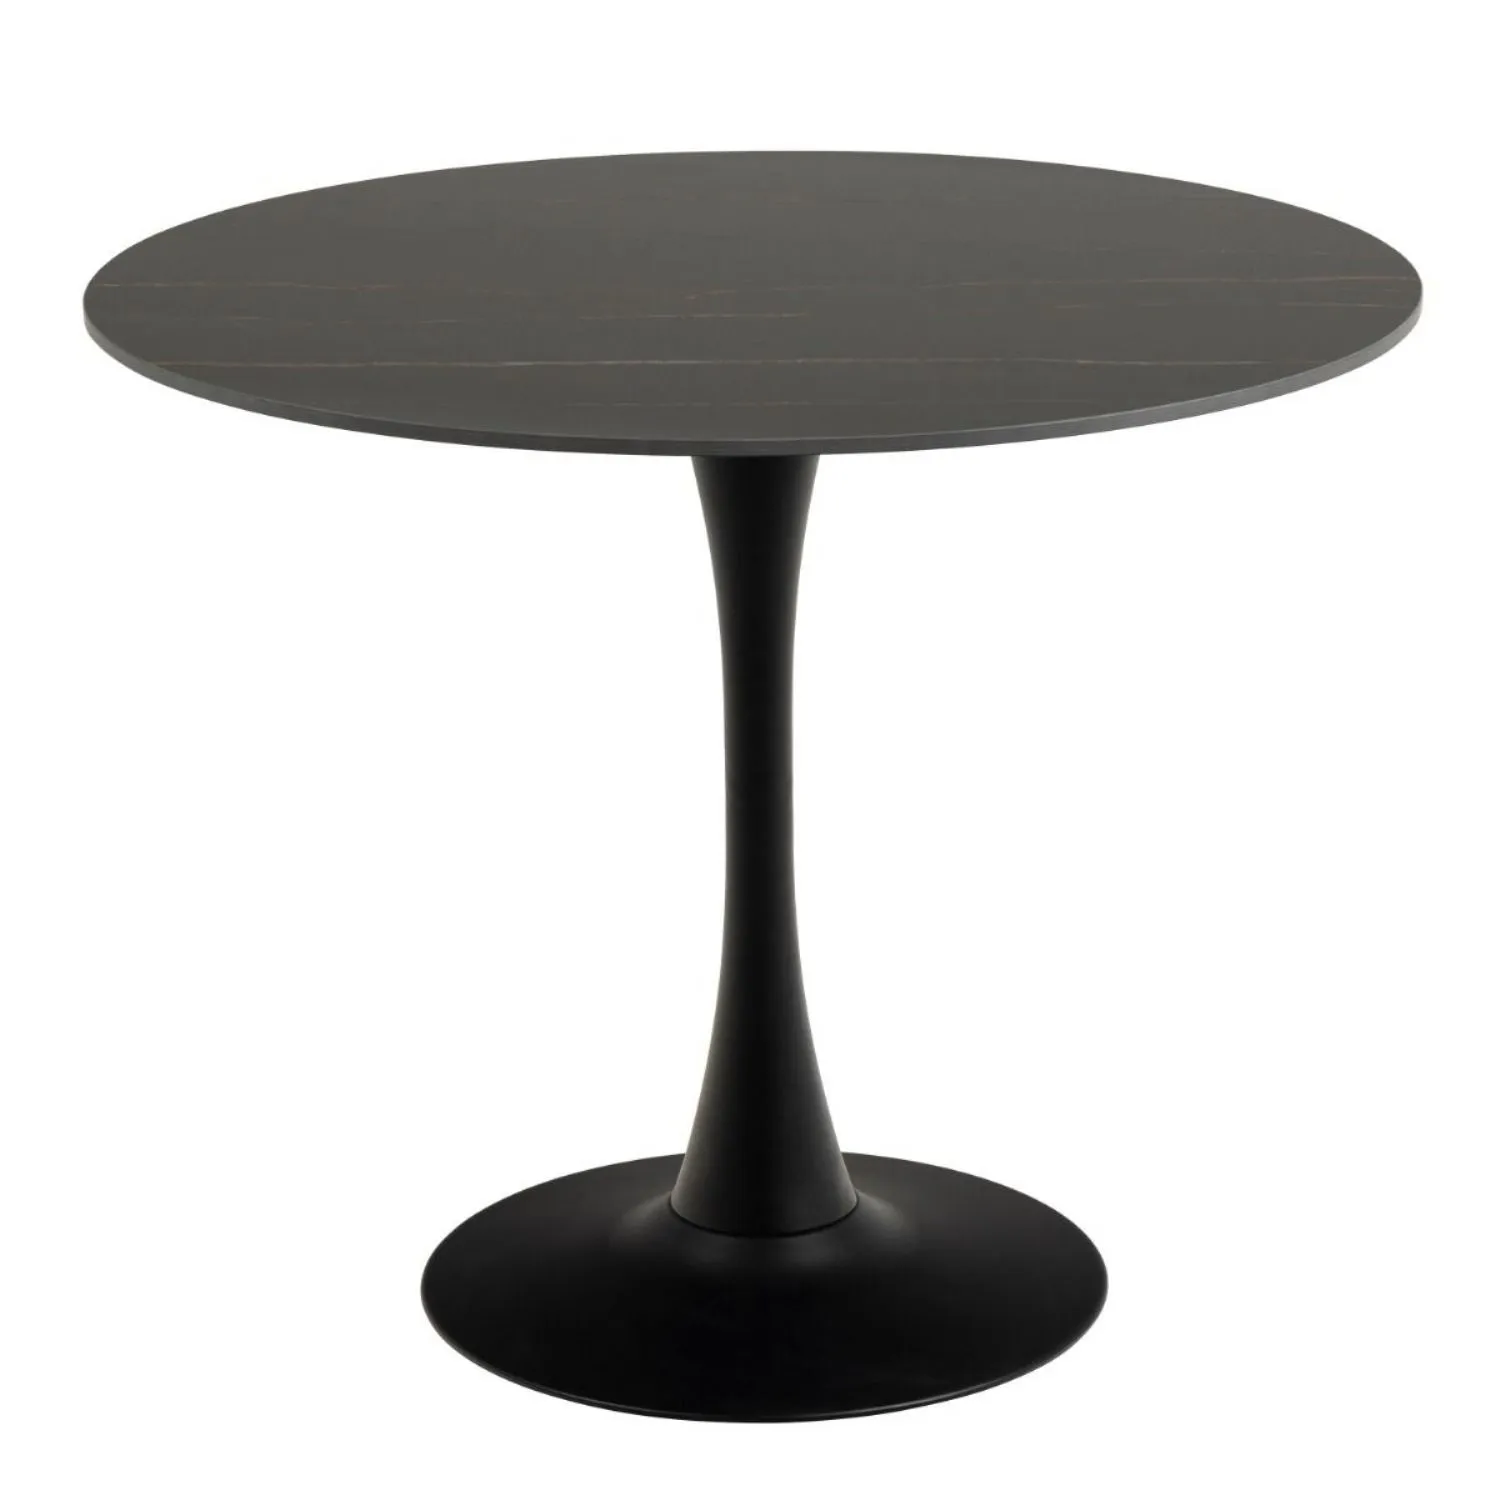 Malta Round Dining Table in Black